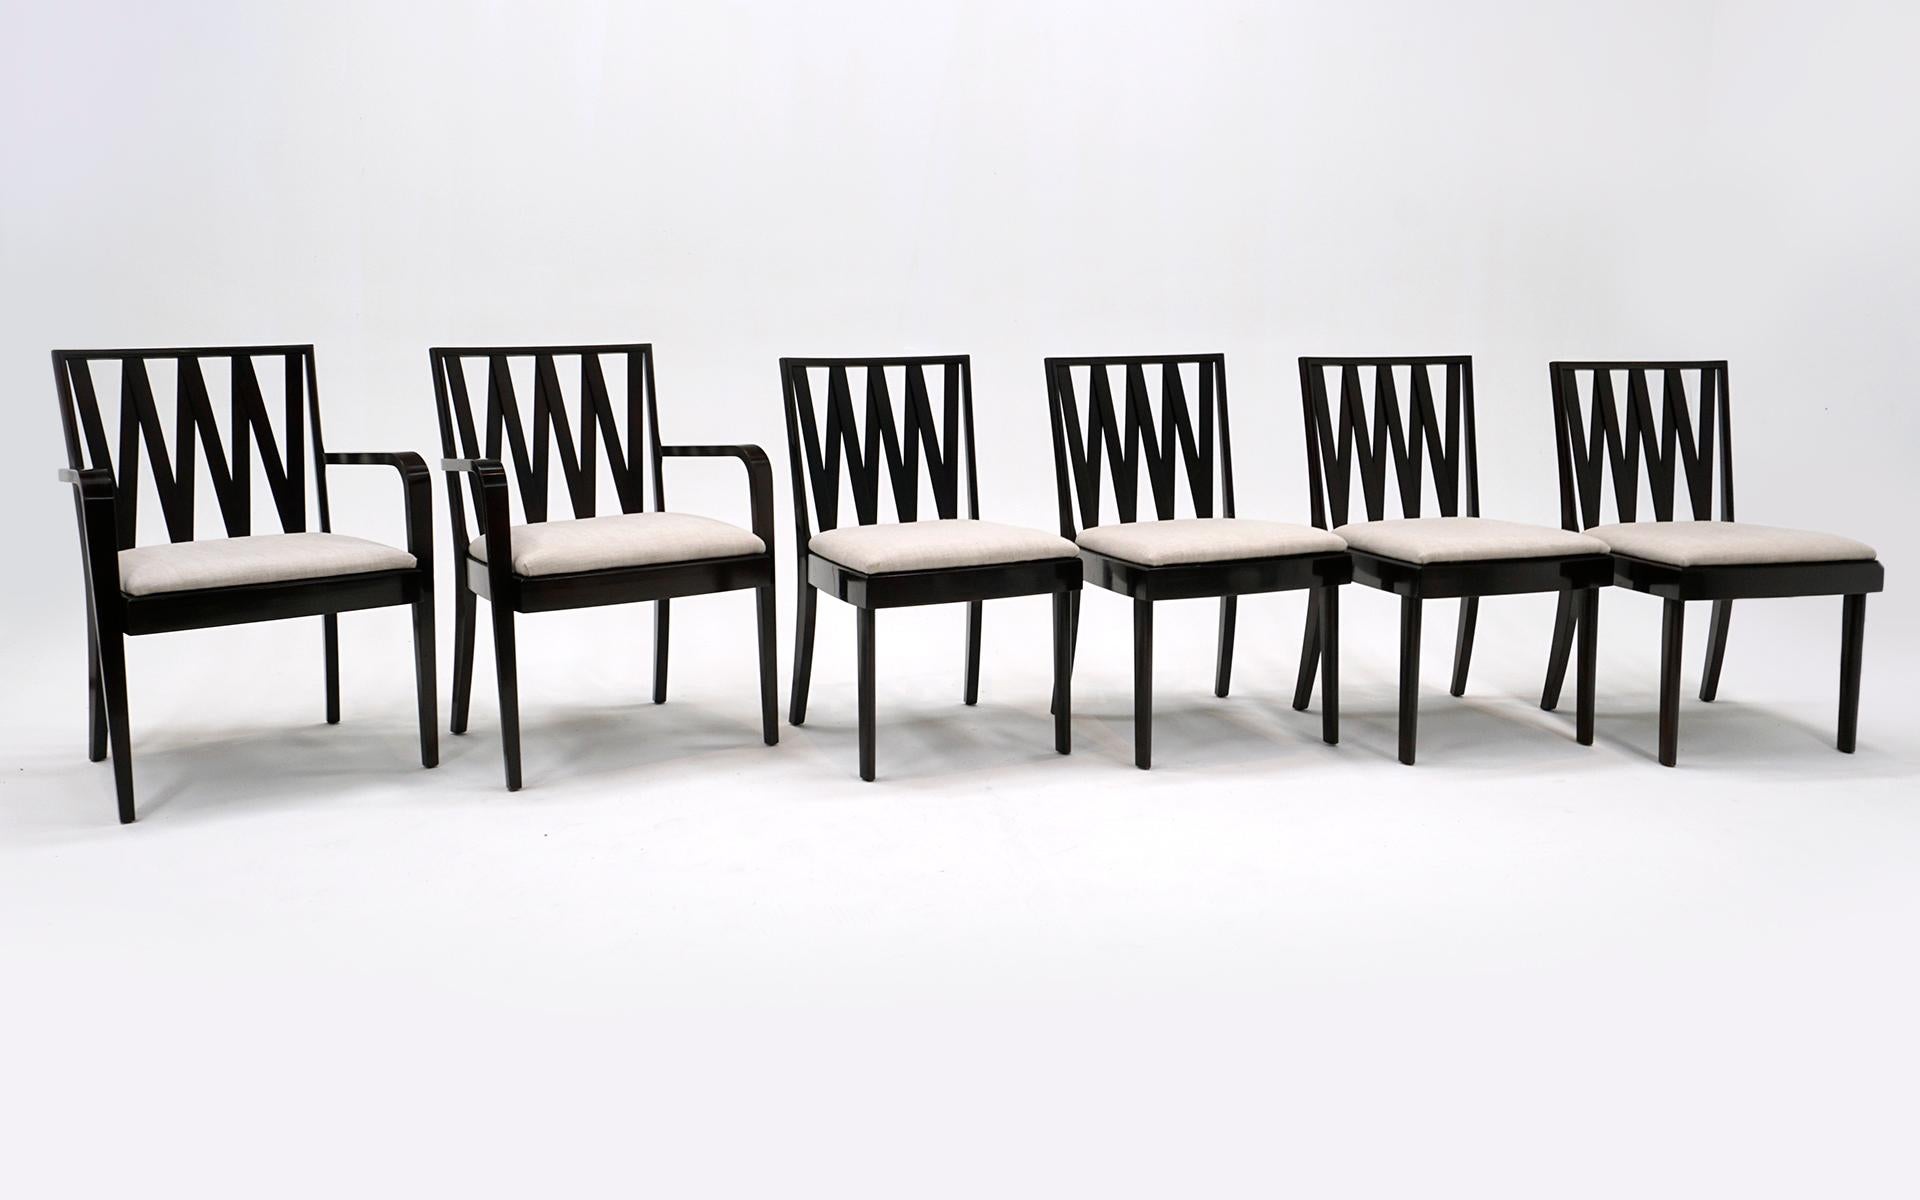 Set of 6 dining chairs, two armchairs and four side chairs, designed by Paul Frankl and made by Johnson Furniture Co., 1950s. This set has the original dark mahogany finish in very good condition with newer off white upholstered seats.